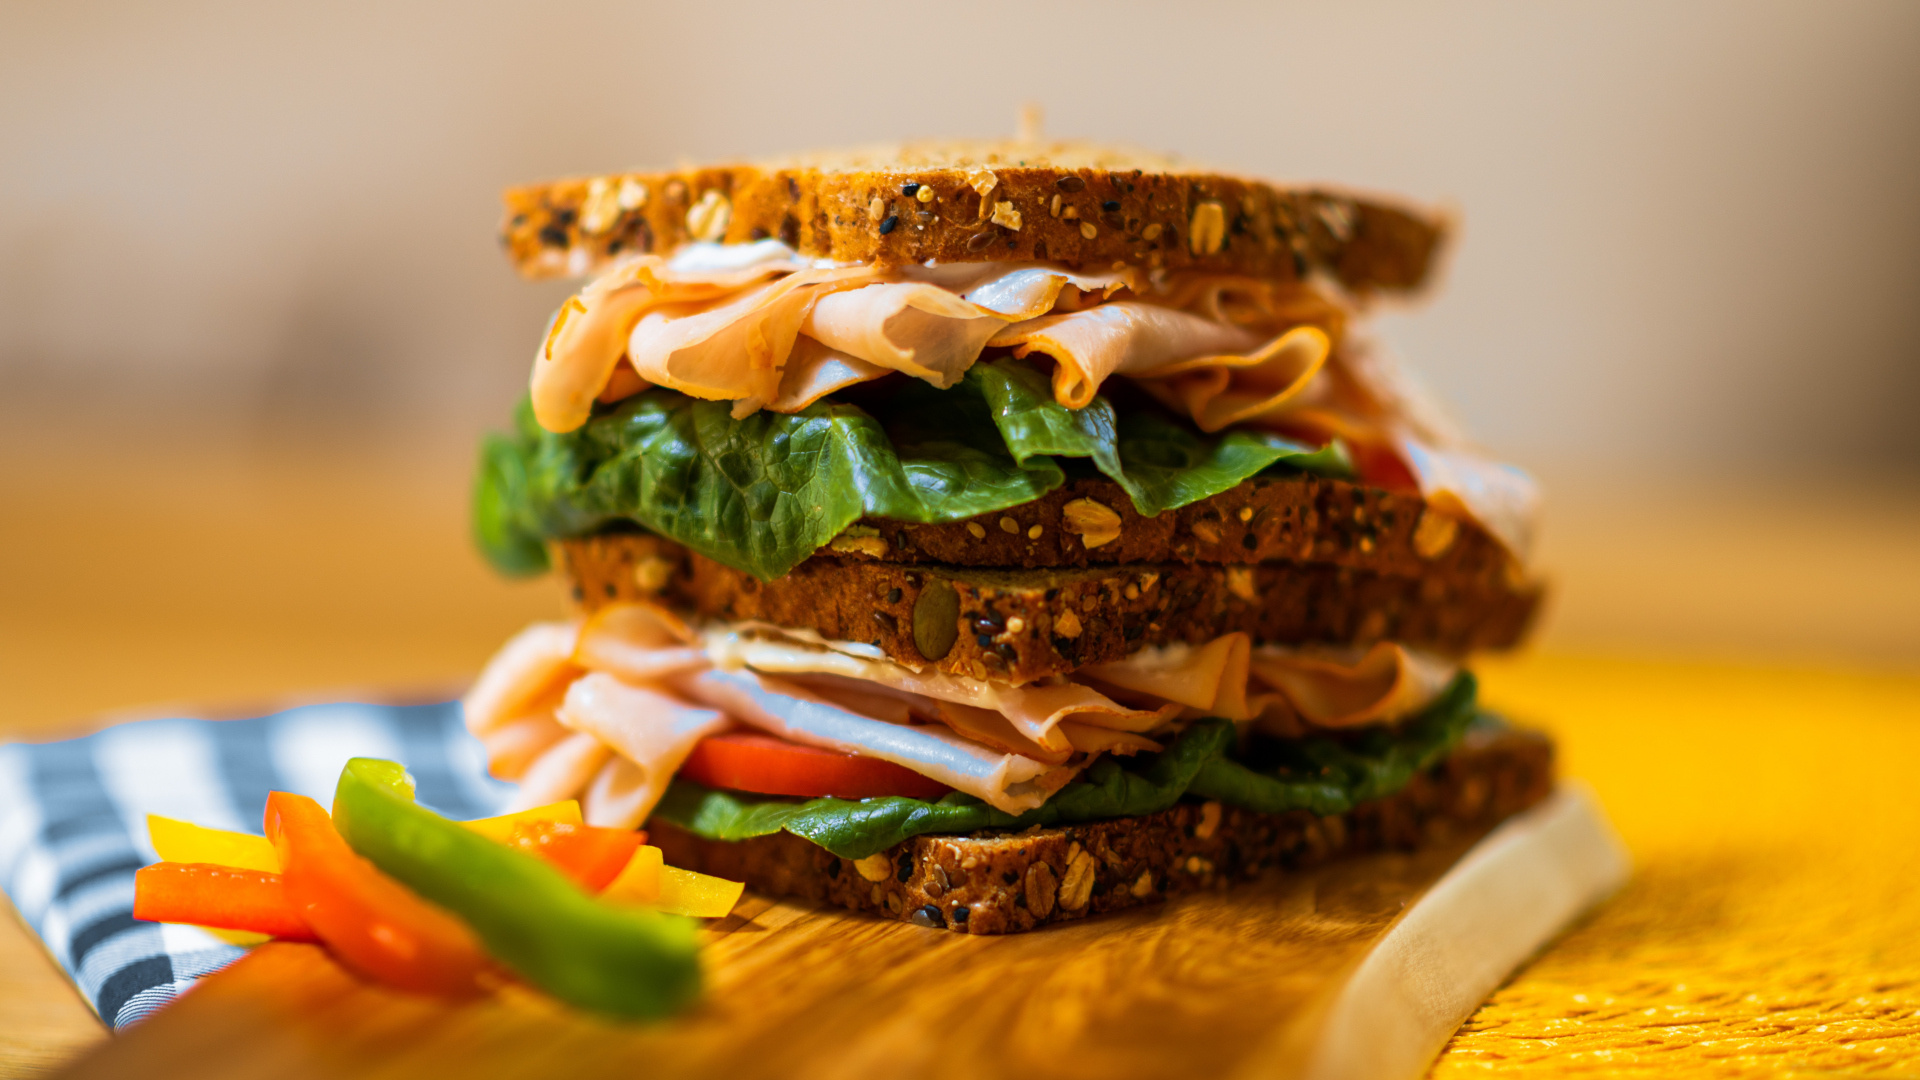 Sandwich: Served warm after grilling or toasting, Turkey, Bell pepper. 1920x1080 Full HD Wallpaper.